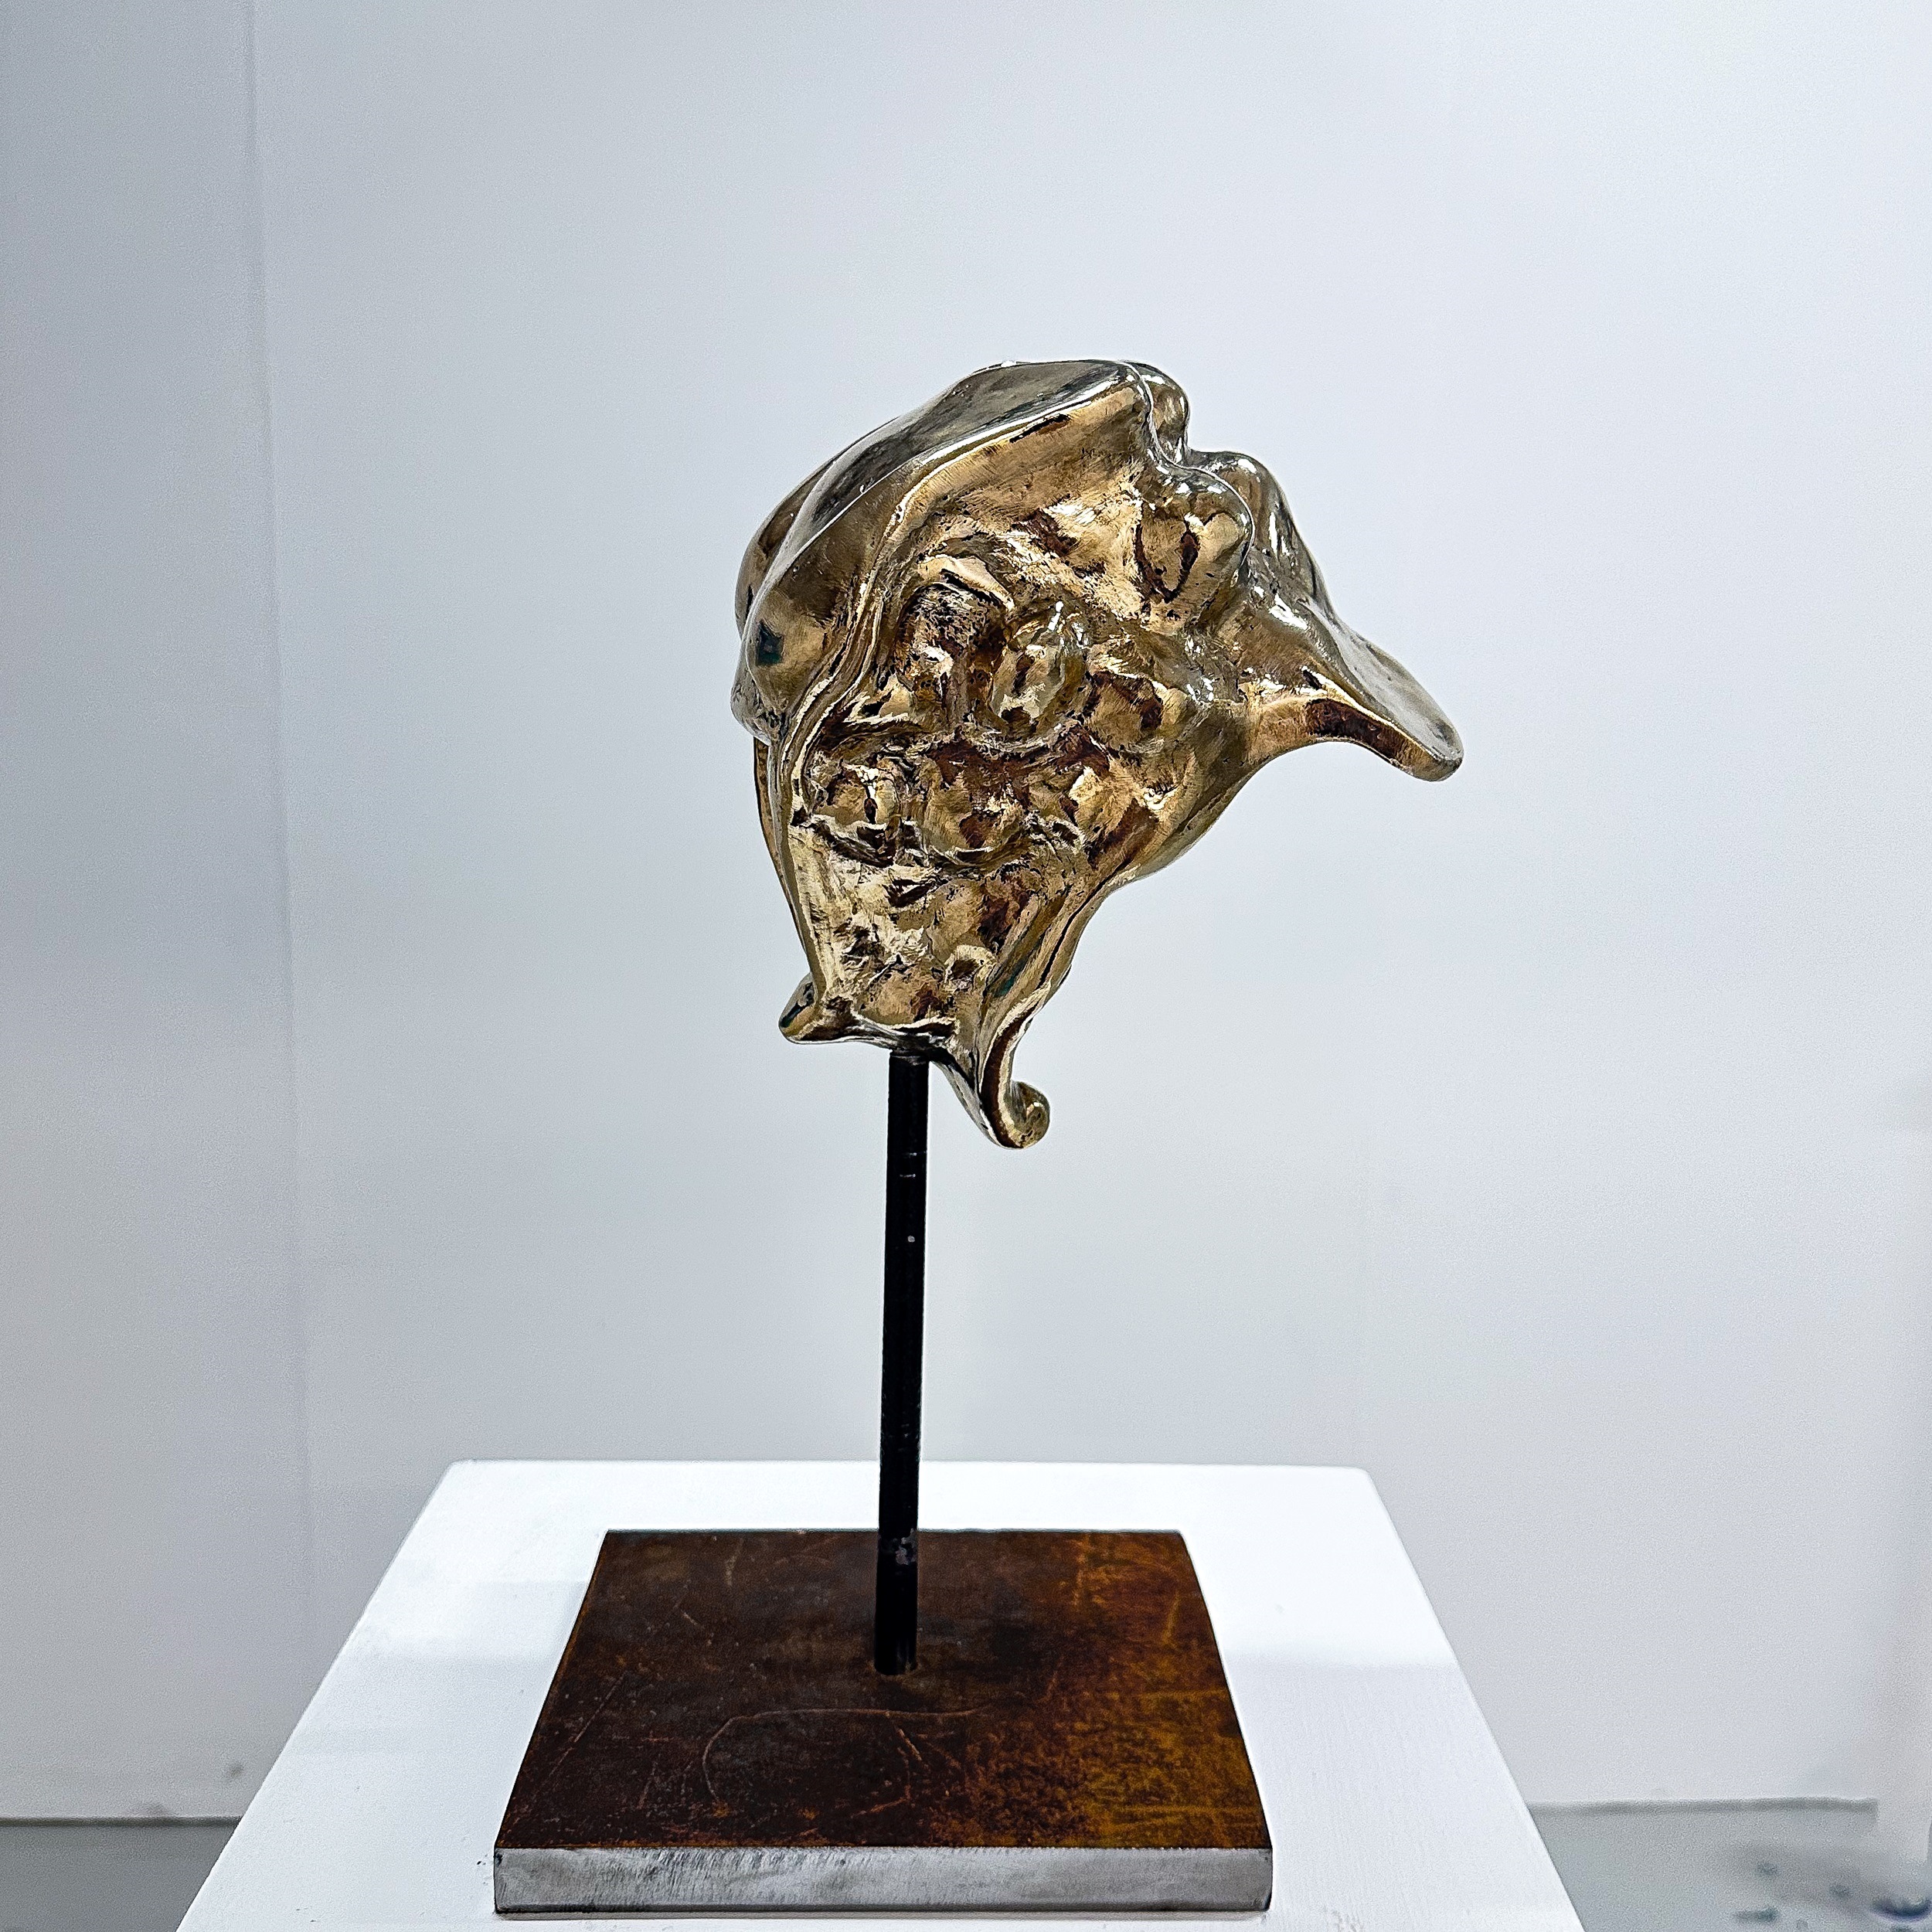 Bronze Sculpture work by Julian Giacomelli of two faces on each end in a biomorphic style, one frowning and the other laughing.